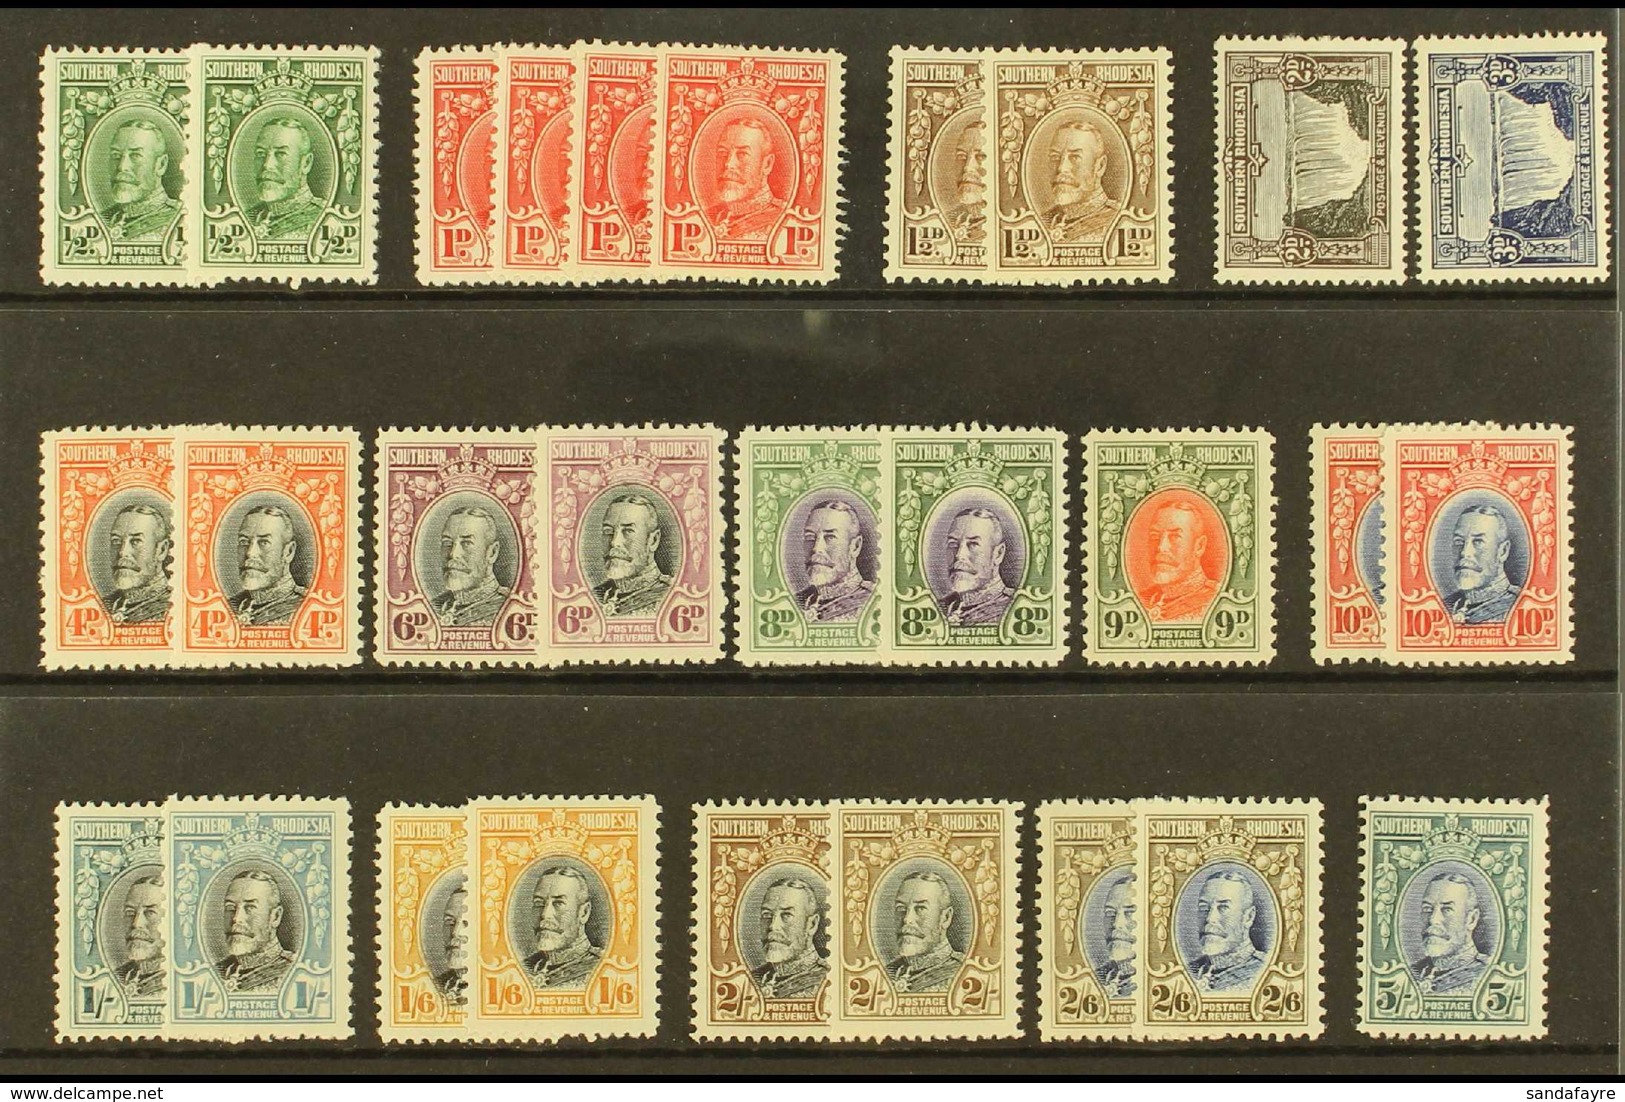 1931-37 King George V Definitives Complete Basic Set With All Of The Perf 12 And Perf 11½ Variants I.e. Both 1½d, Both 4 - Southern Rhodesia (...-1964)